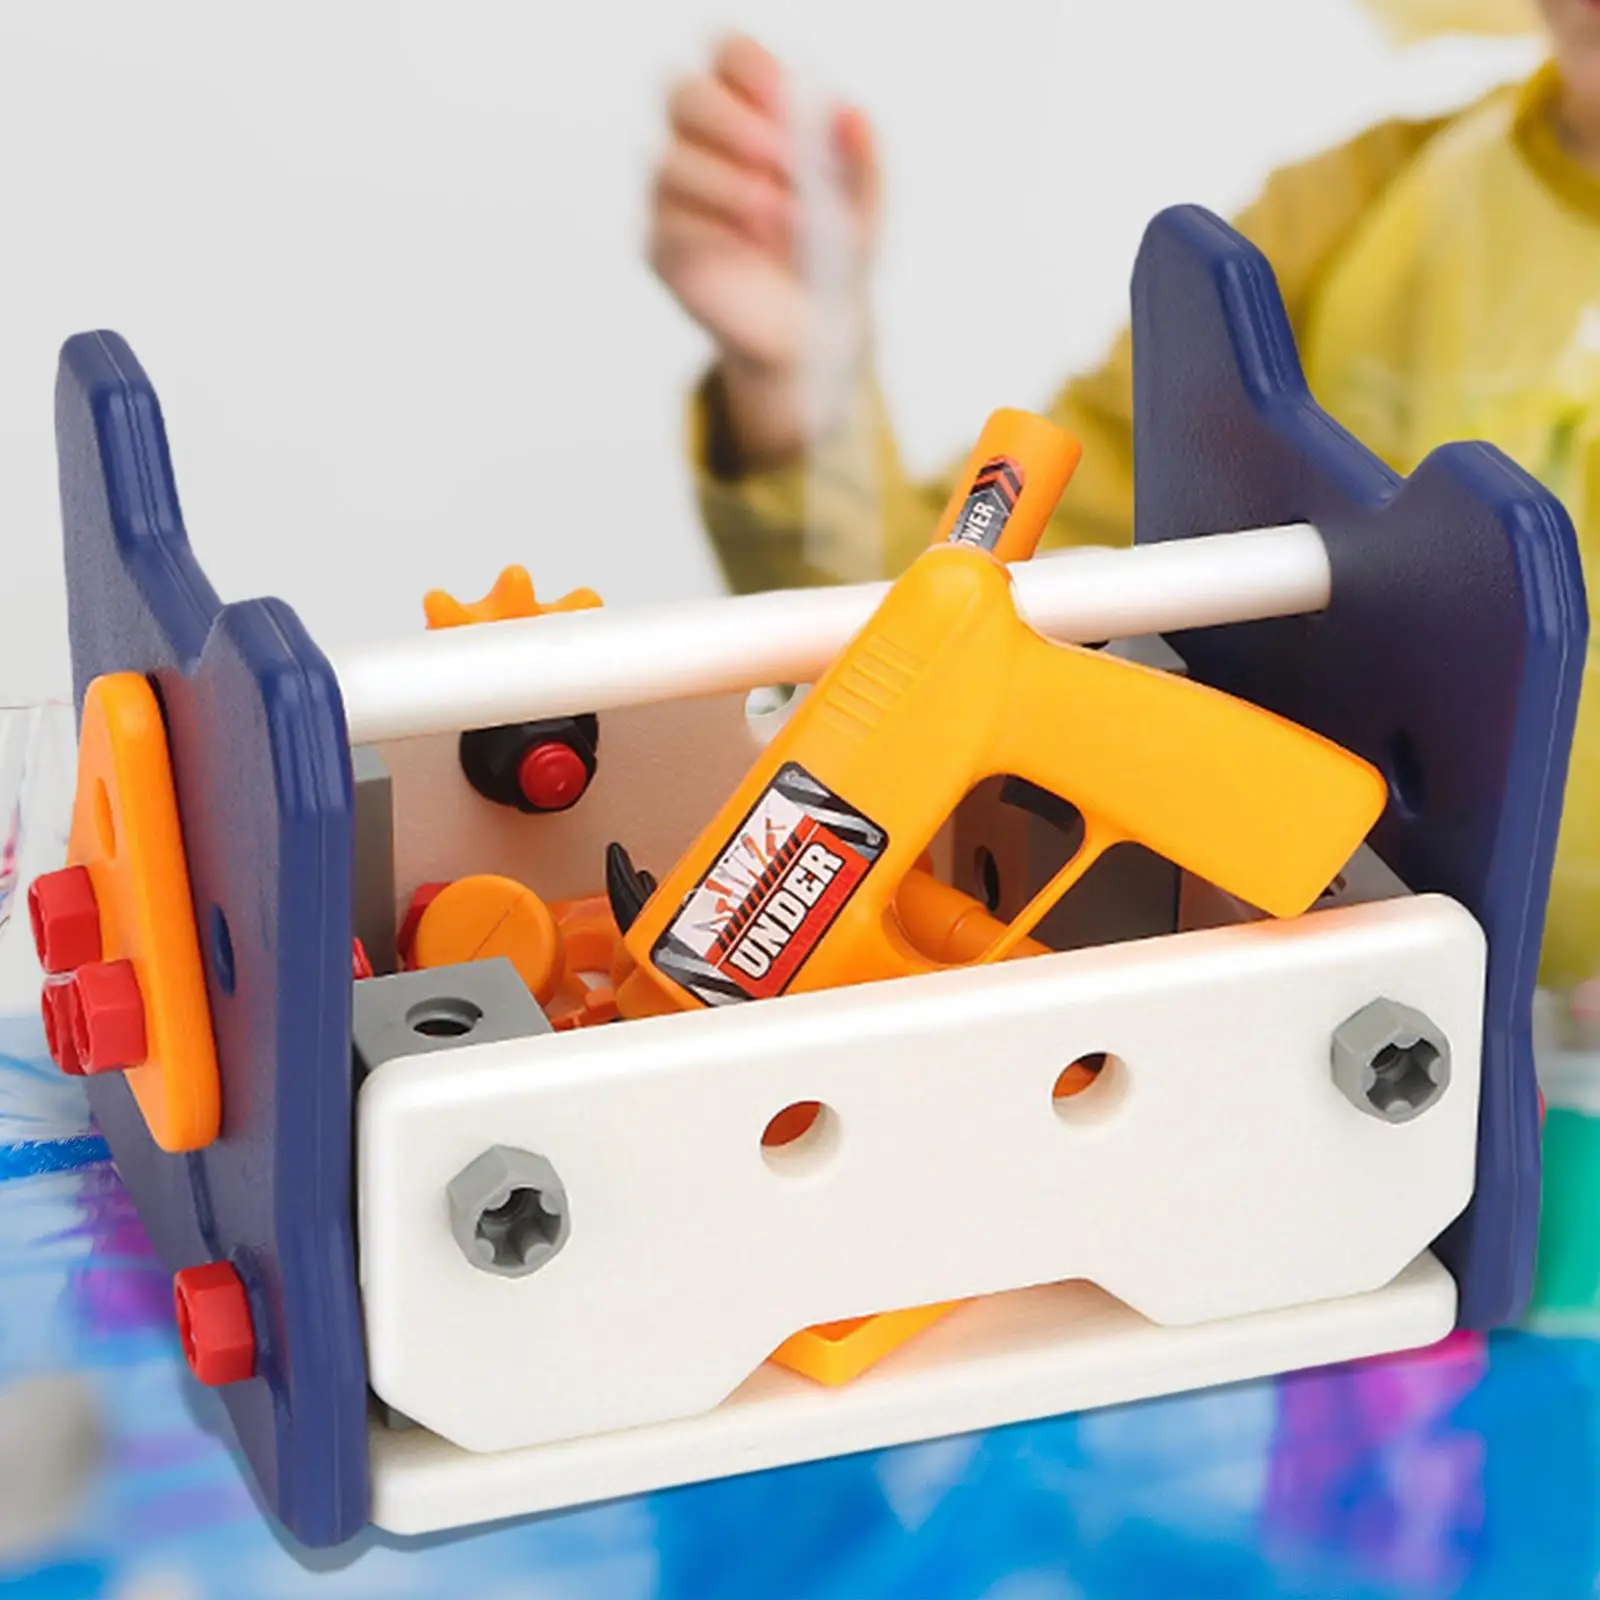 Tool Box Toy Pretend Play Develops Fine Motor Skills Gift for